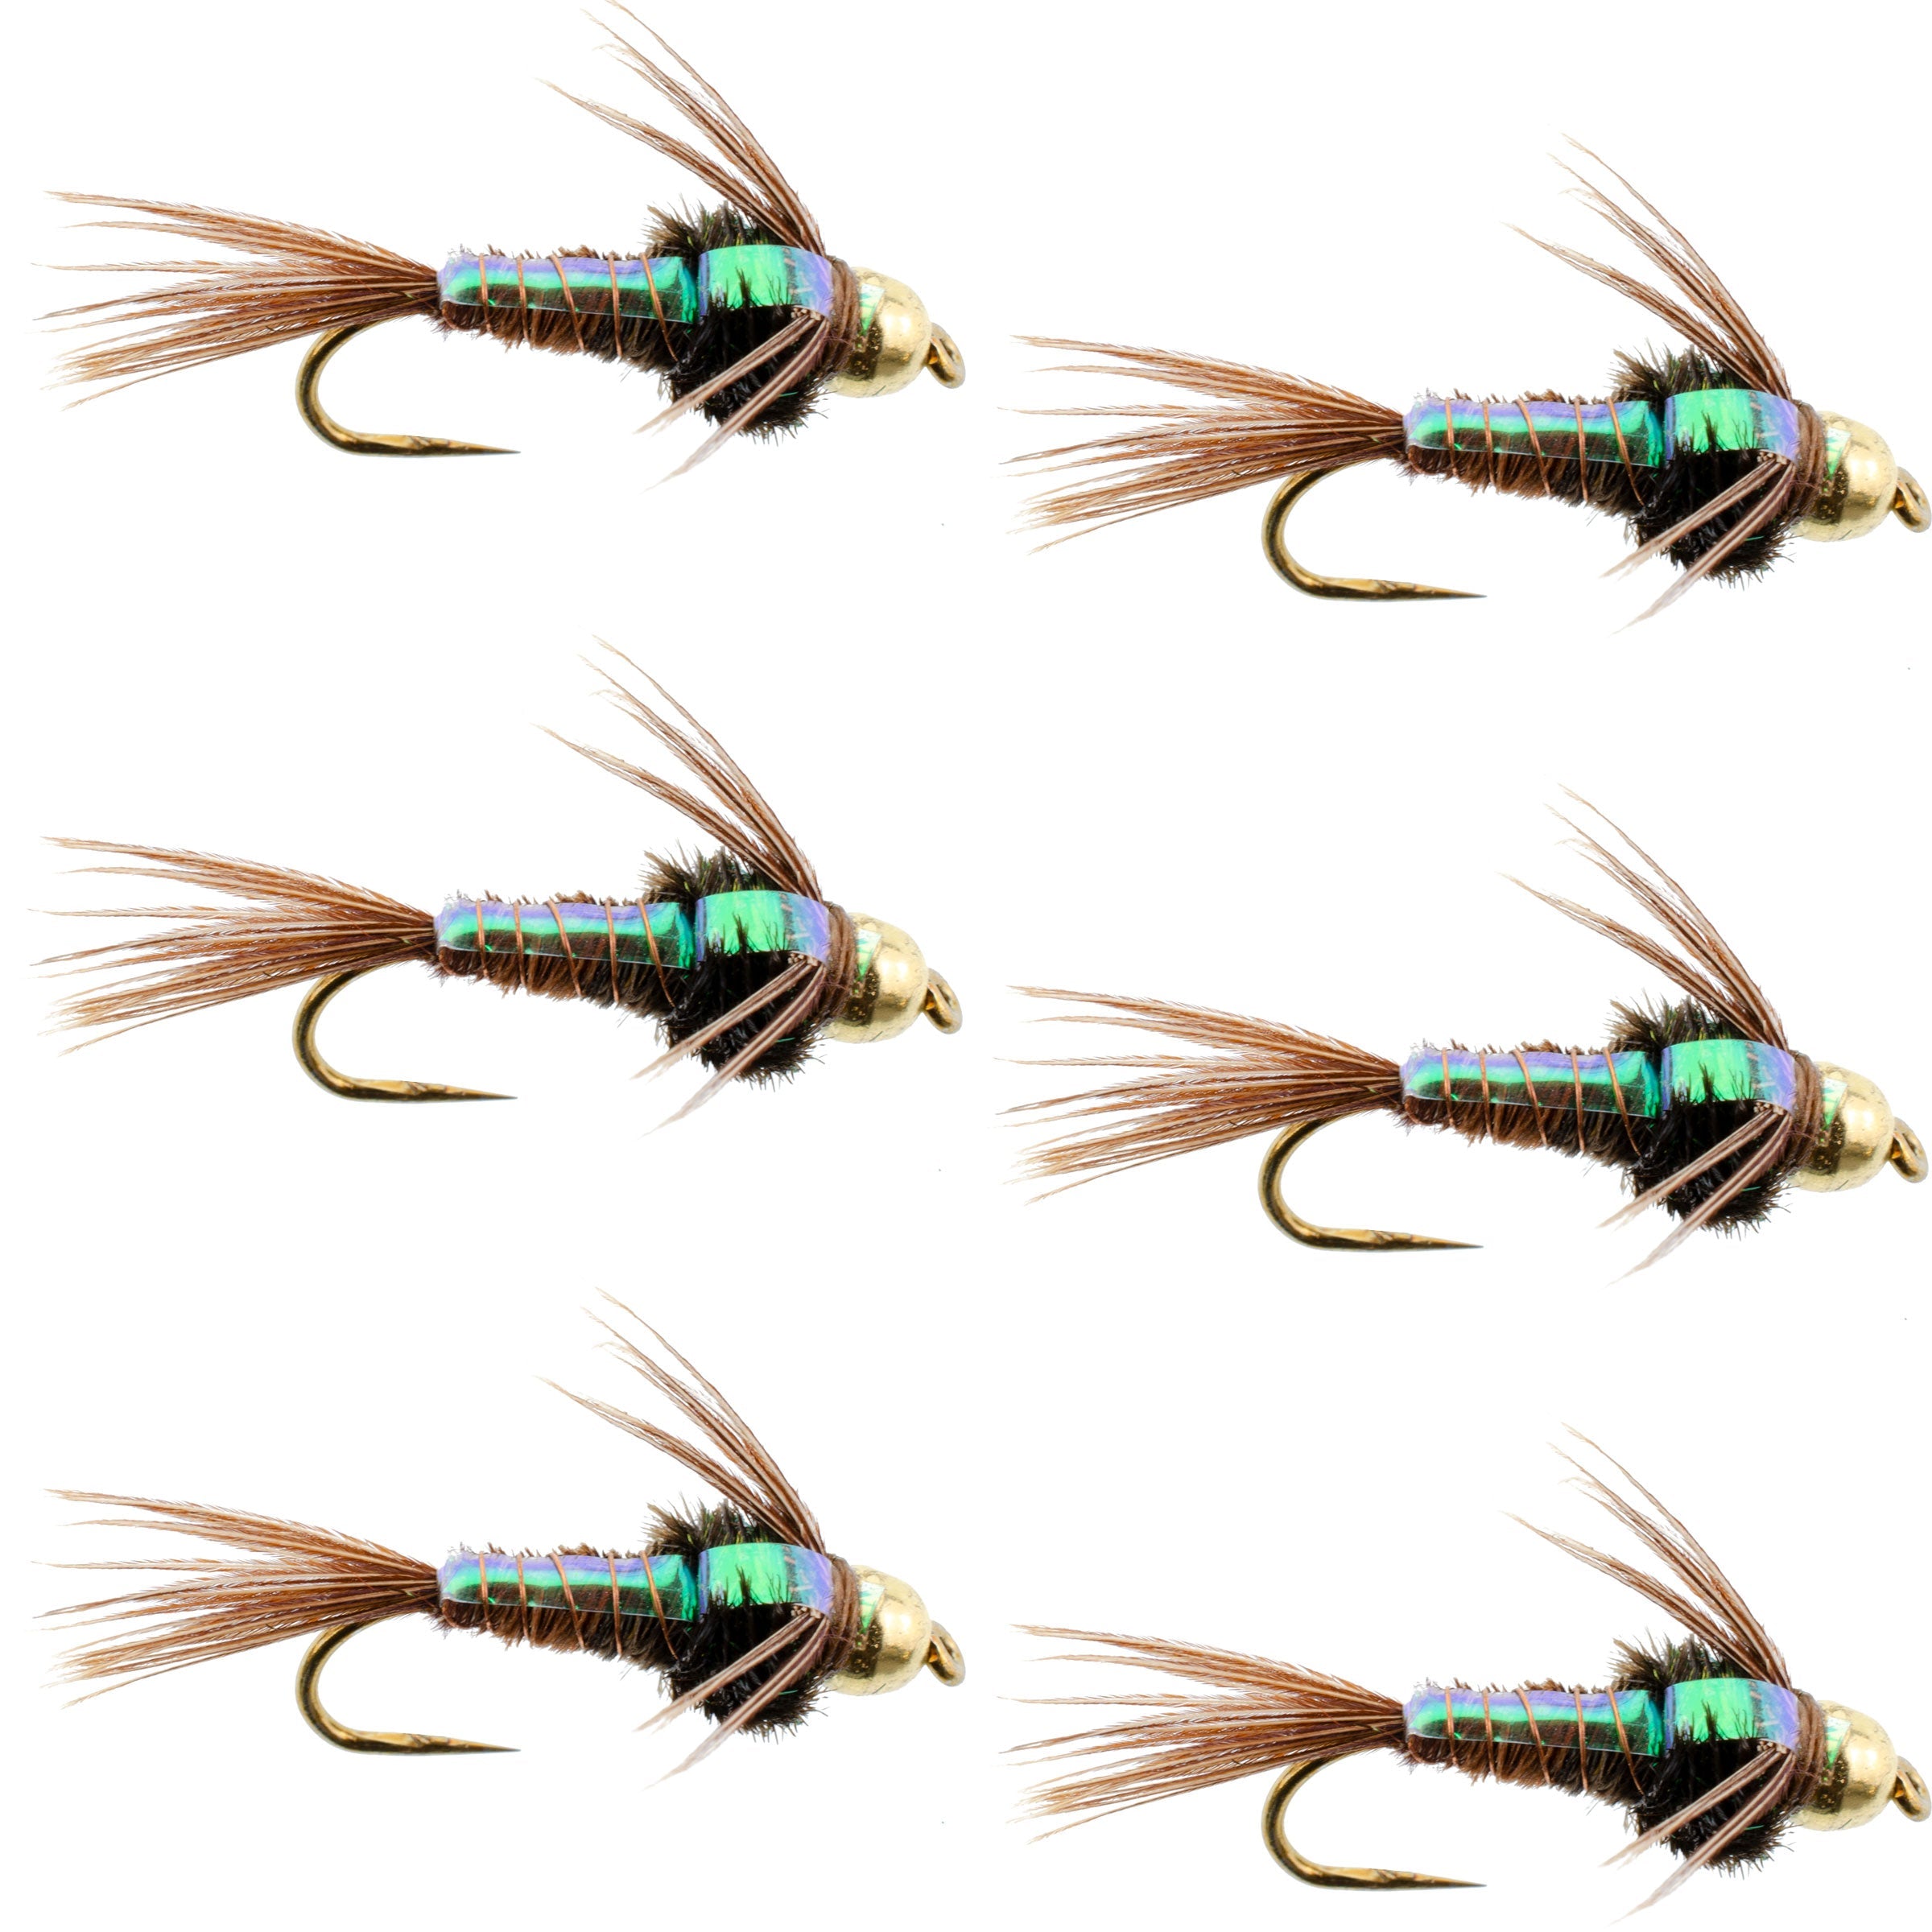 Barbless Bead Head Flashback Pheasant Tail Nymph Fly 6 Flies Hook Size 14